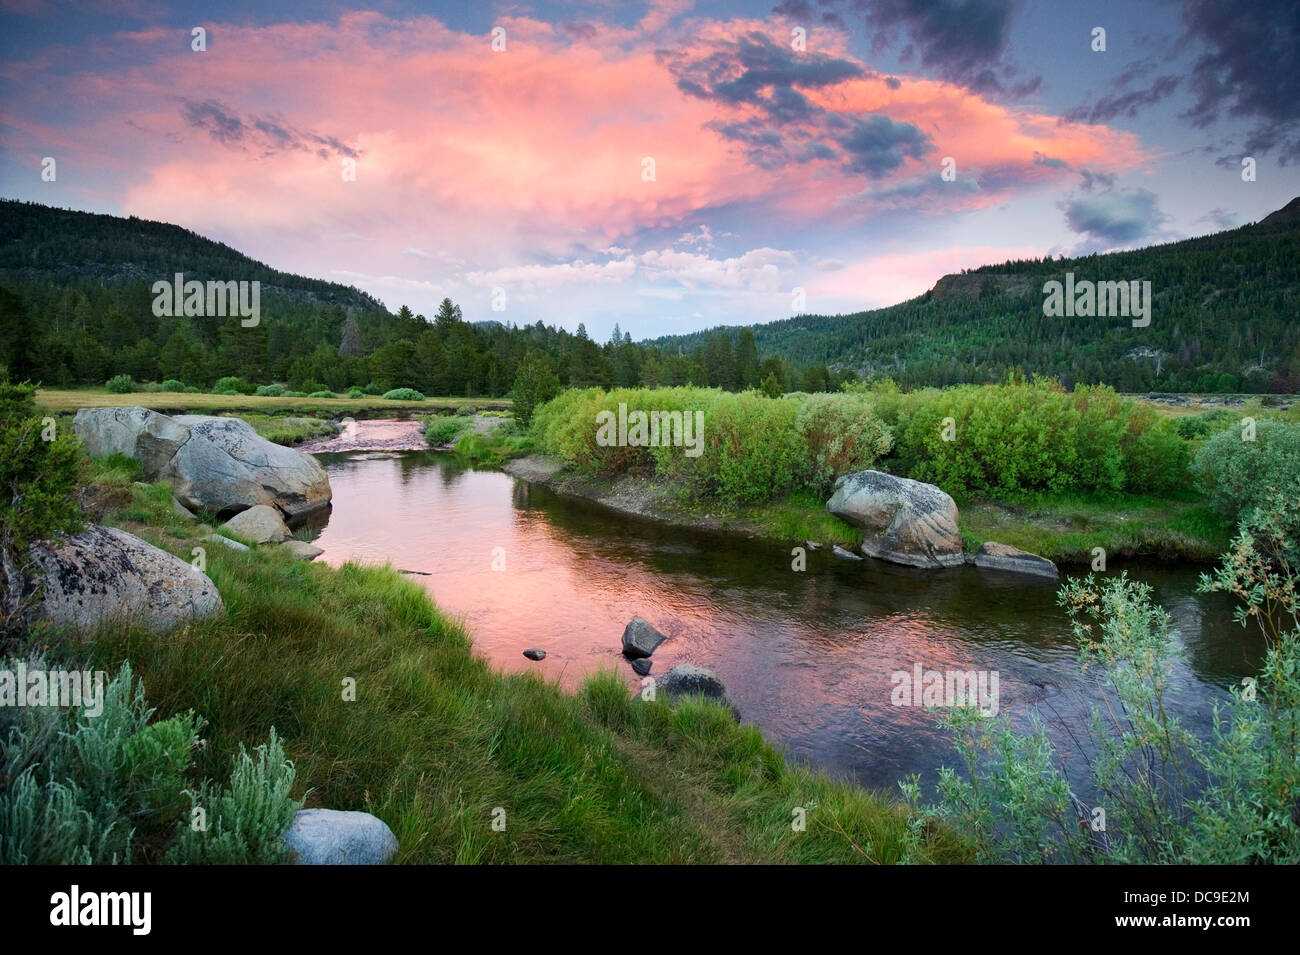 A beautiful sunset over the West Fork of the Carson River in Hope Valley near South Lake Tahoe, CA. Stock Photo